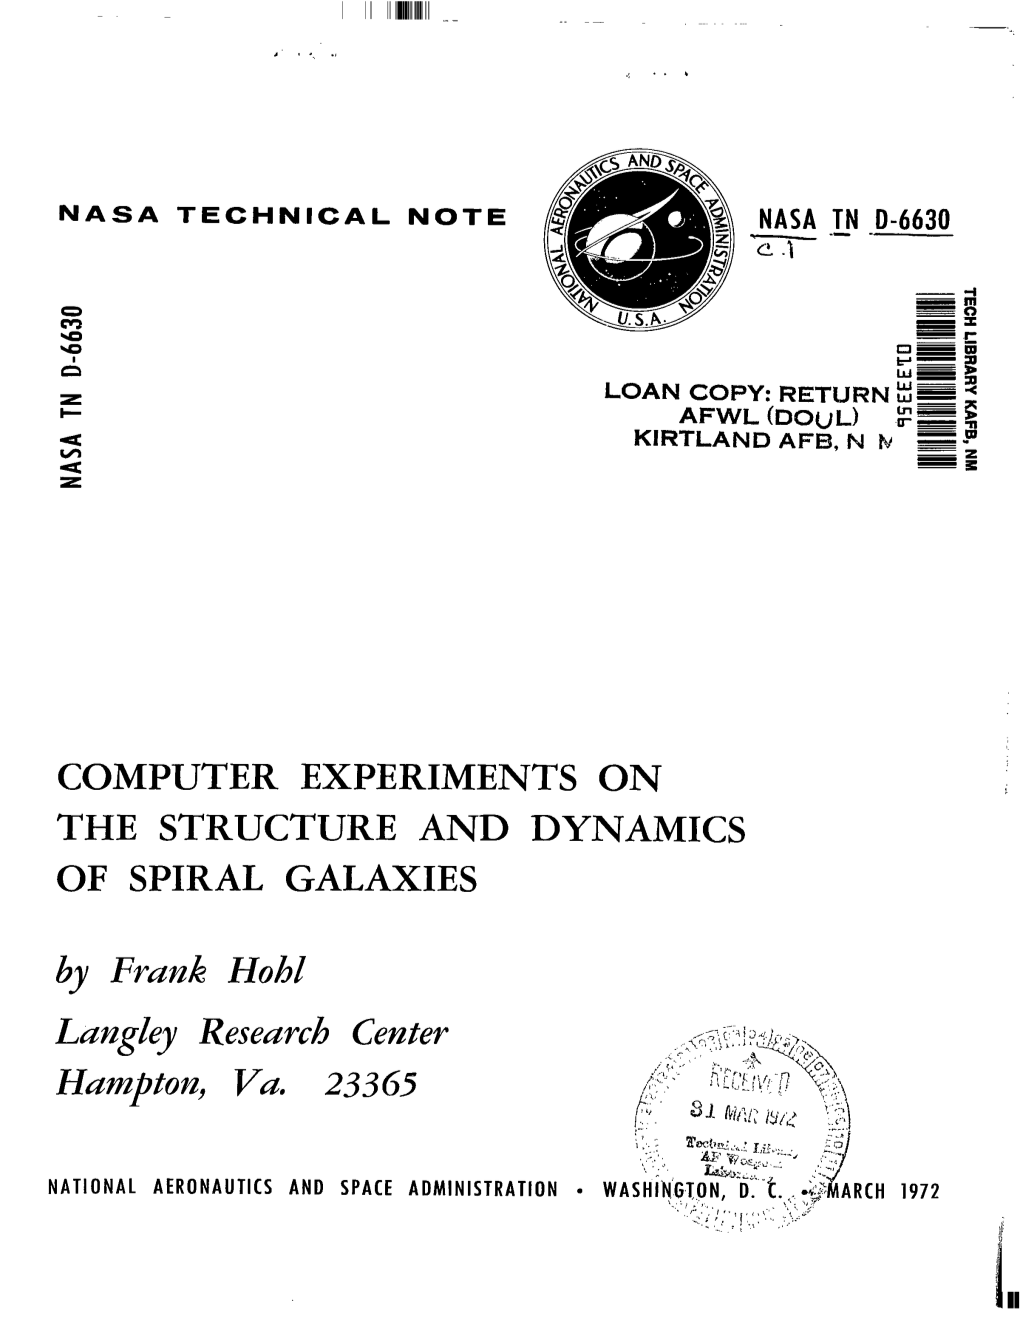 COMPUTER EXPERIMENTS on the STRUCTURE and DYNAMICS of SPIRAL GALAXIES by Frank Hob1 Langley Research Center Hamptopz, Va